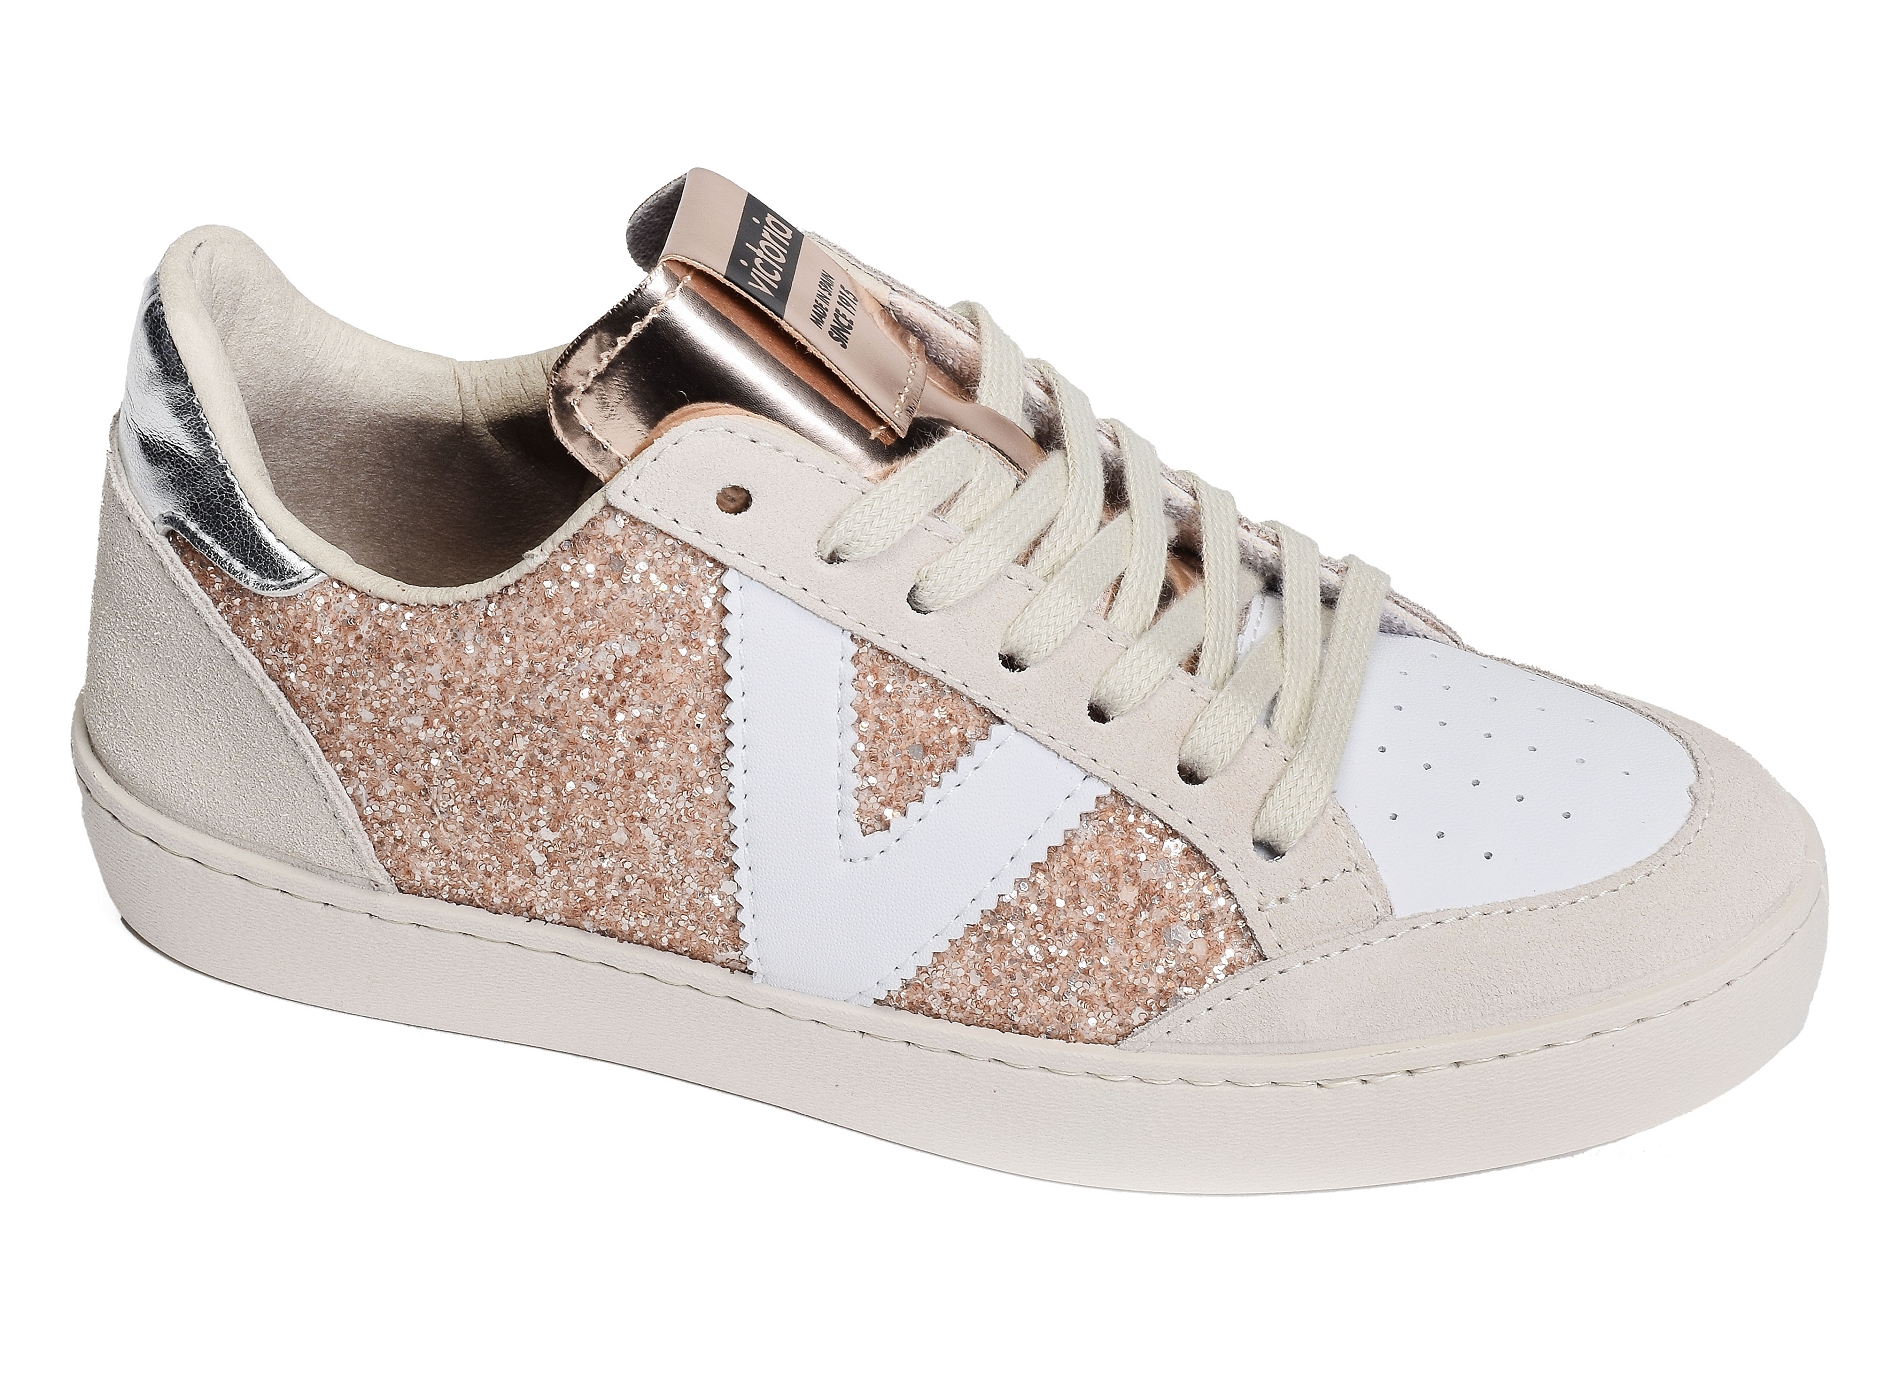 Basket Guess Nude Femme Rose - chaussures